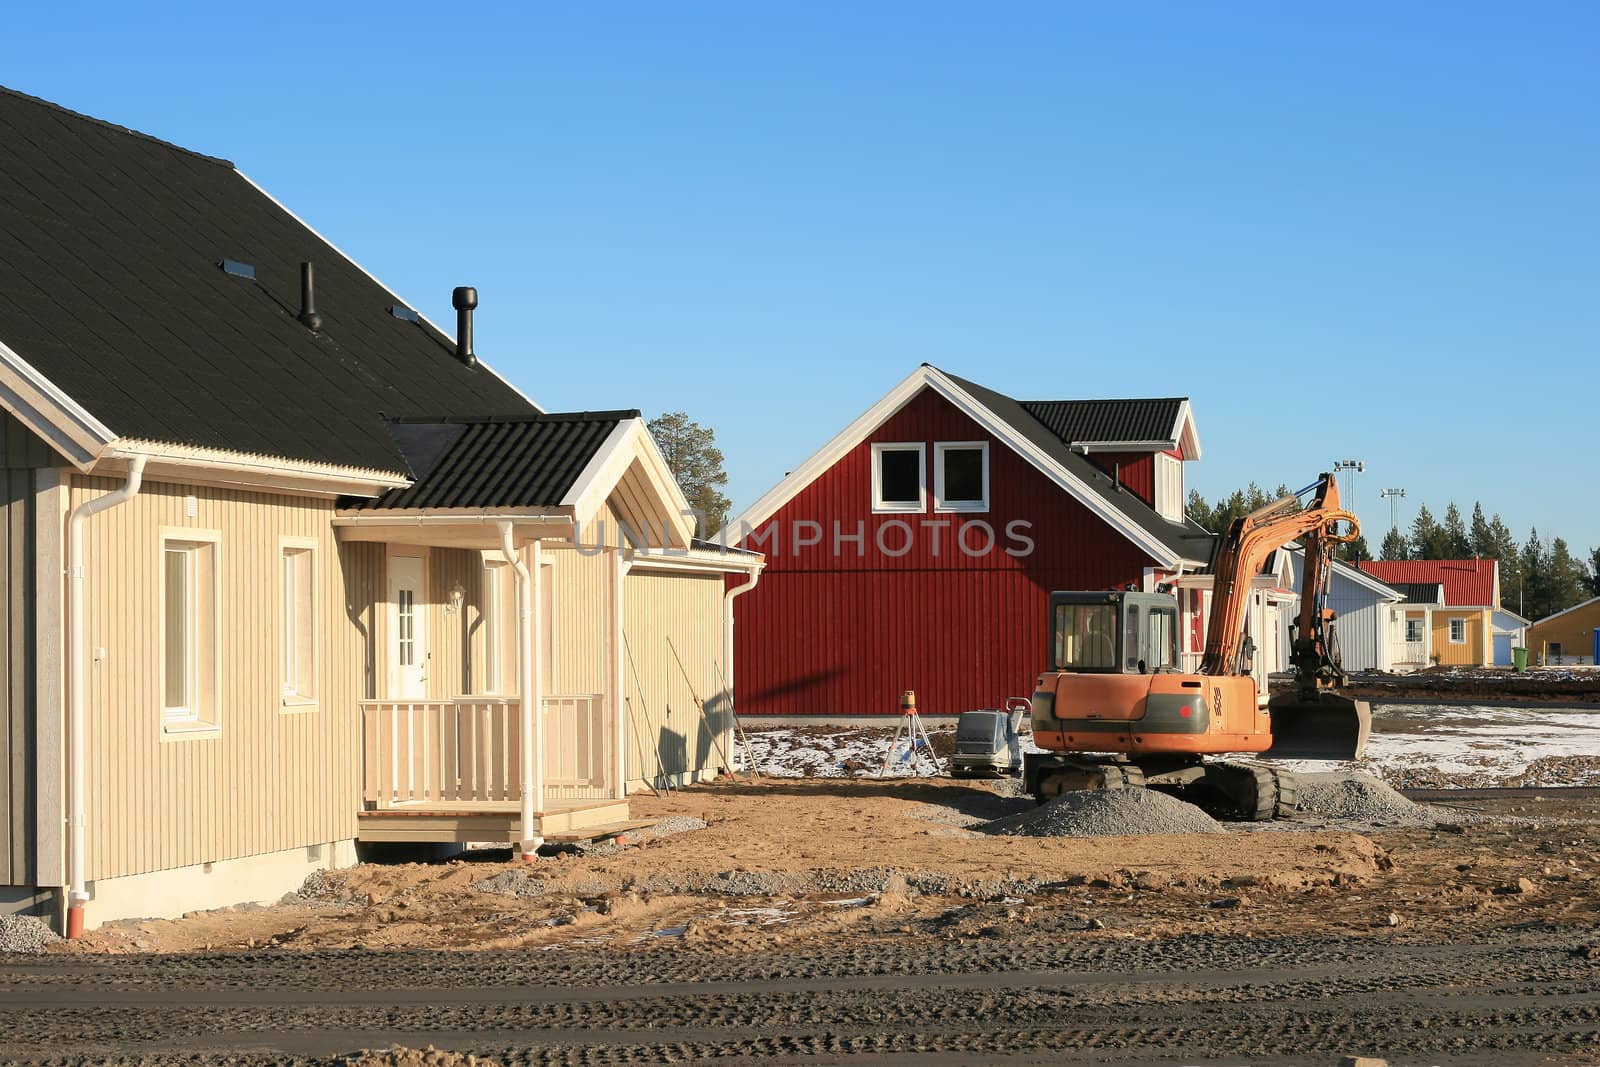 Land preparation with a small excavator around newly built homes.